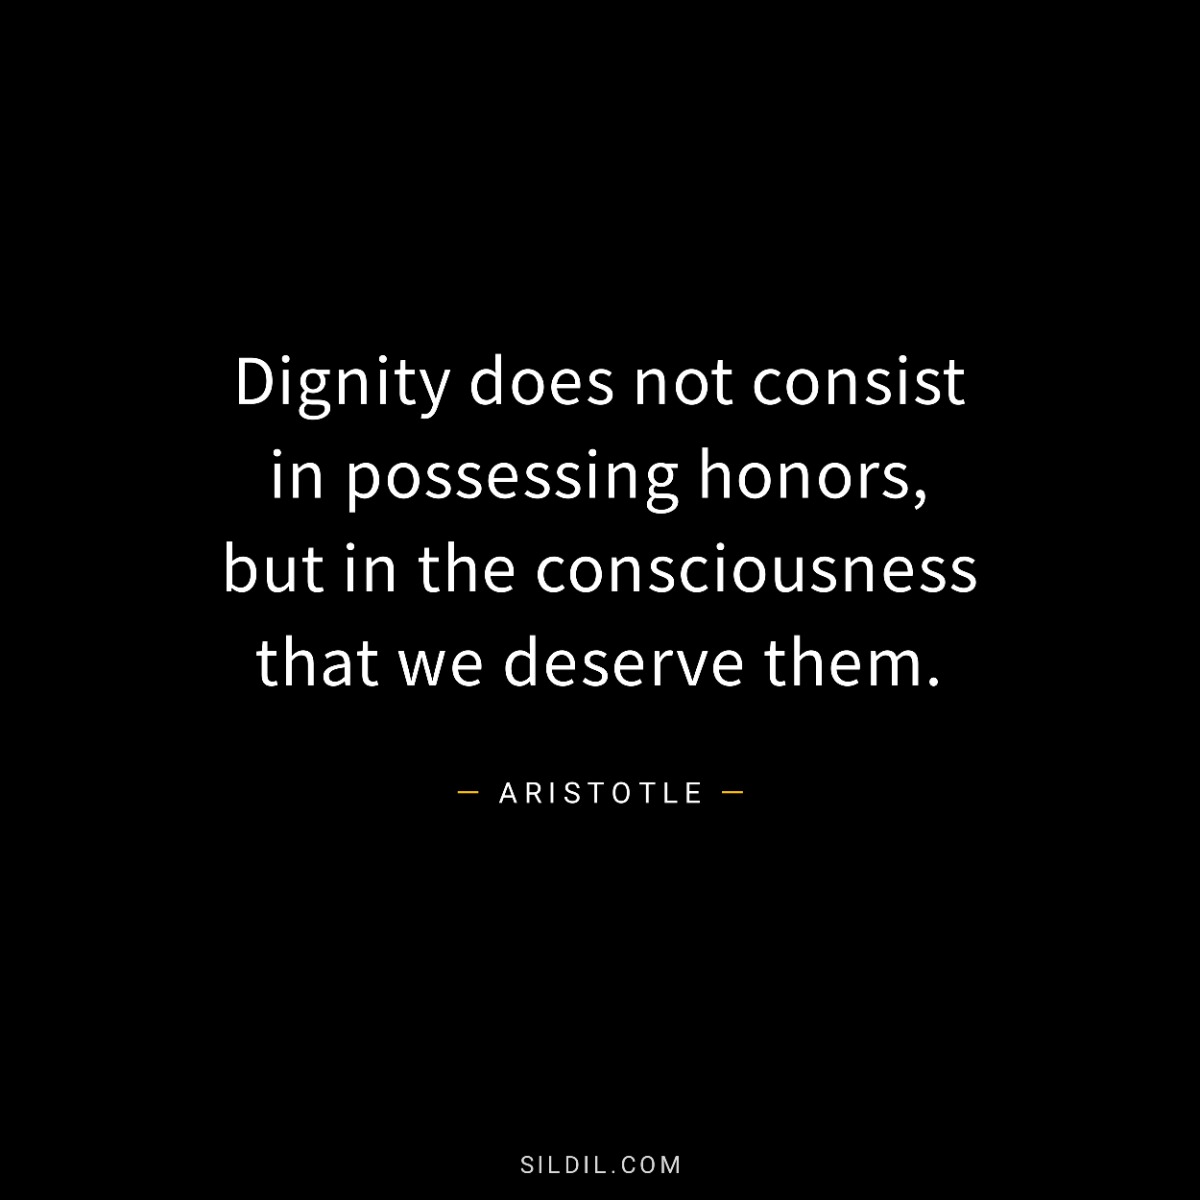 Dignity does not consist in possessing honors, but in the consciousness that we deserve them.